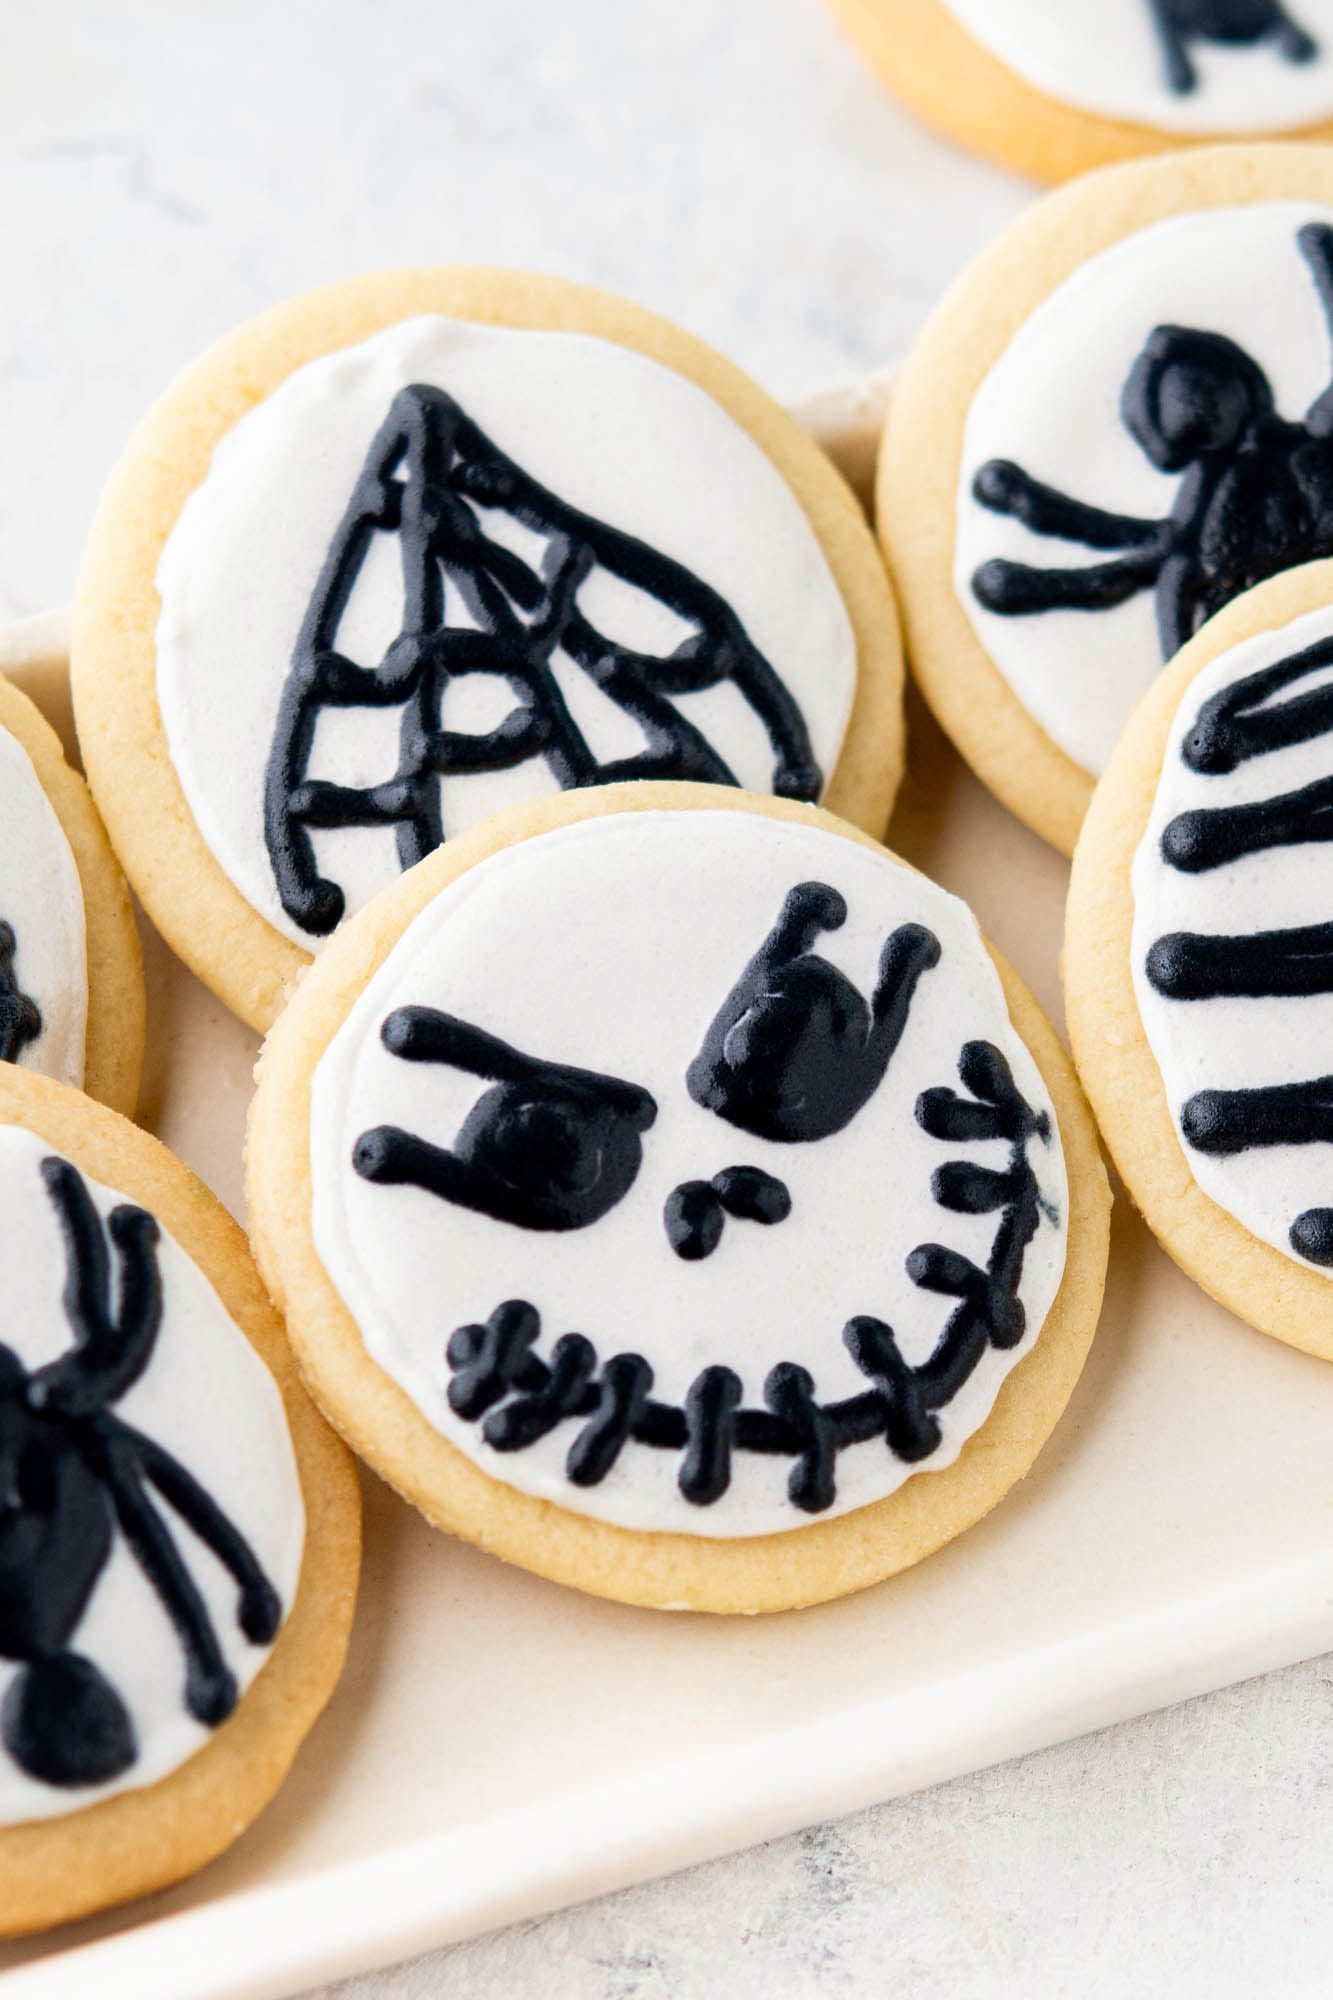 round cut out cookies with white icing and black halloween decorations, skulls and spiders